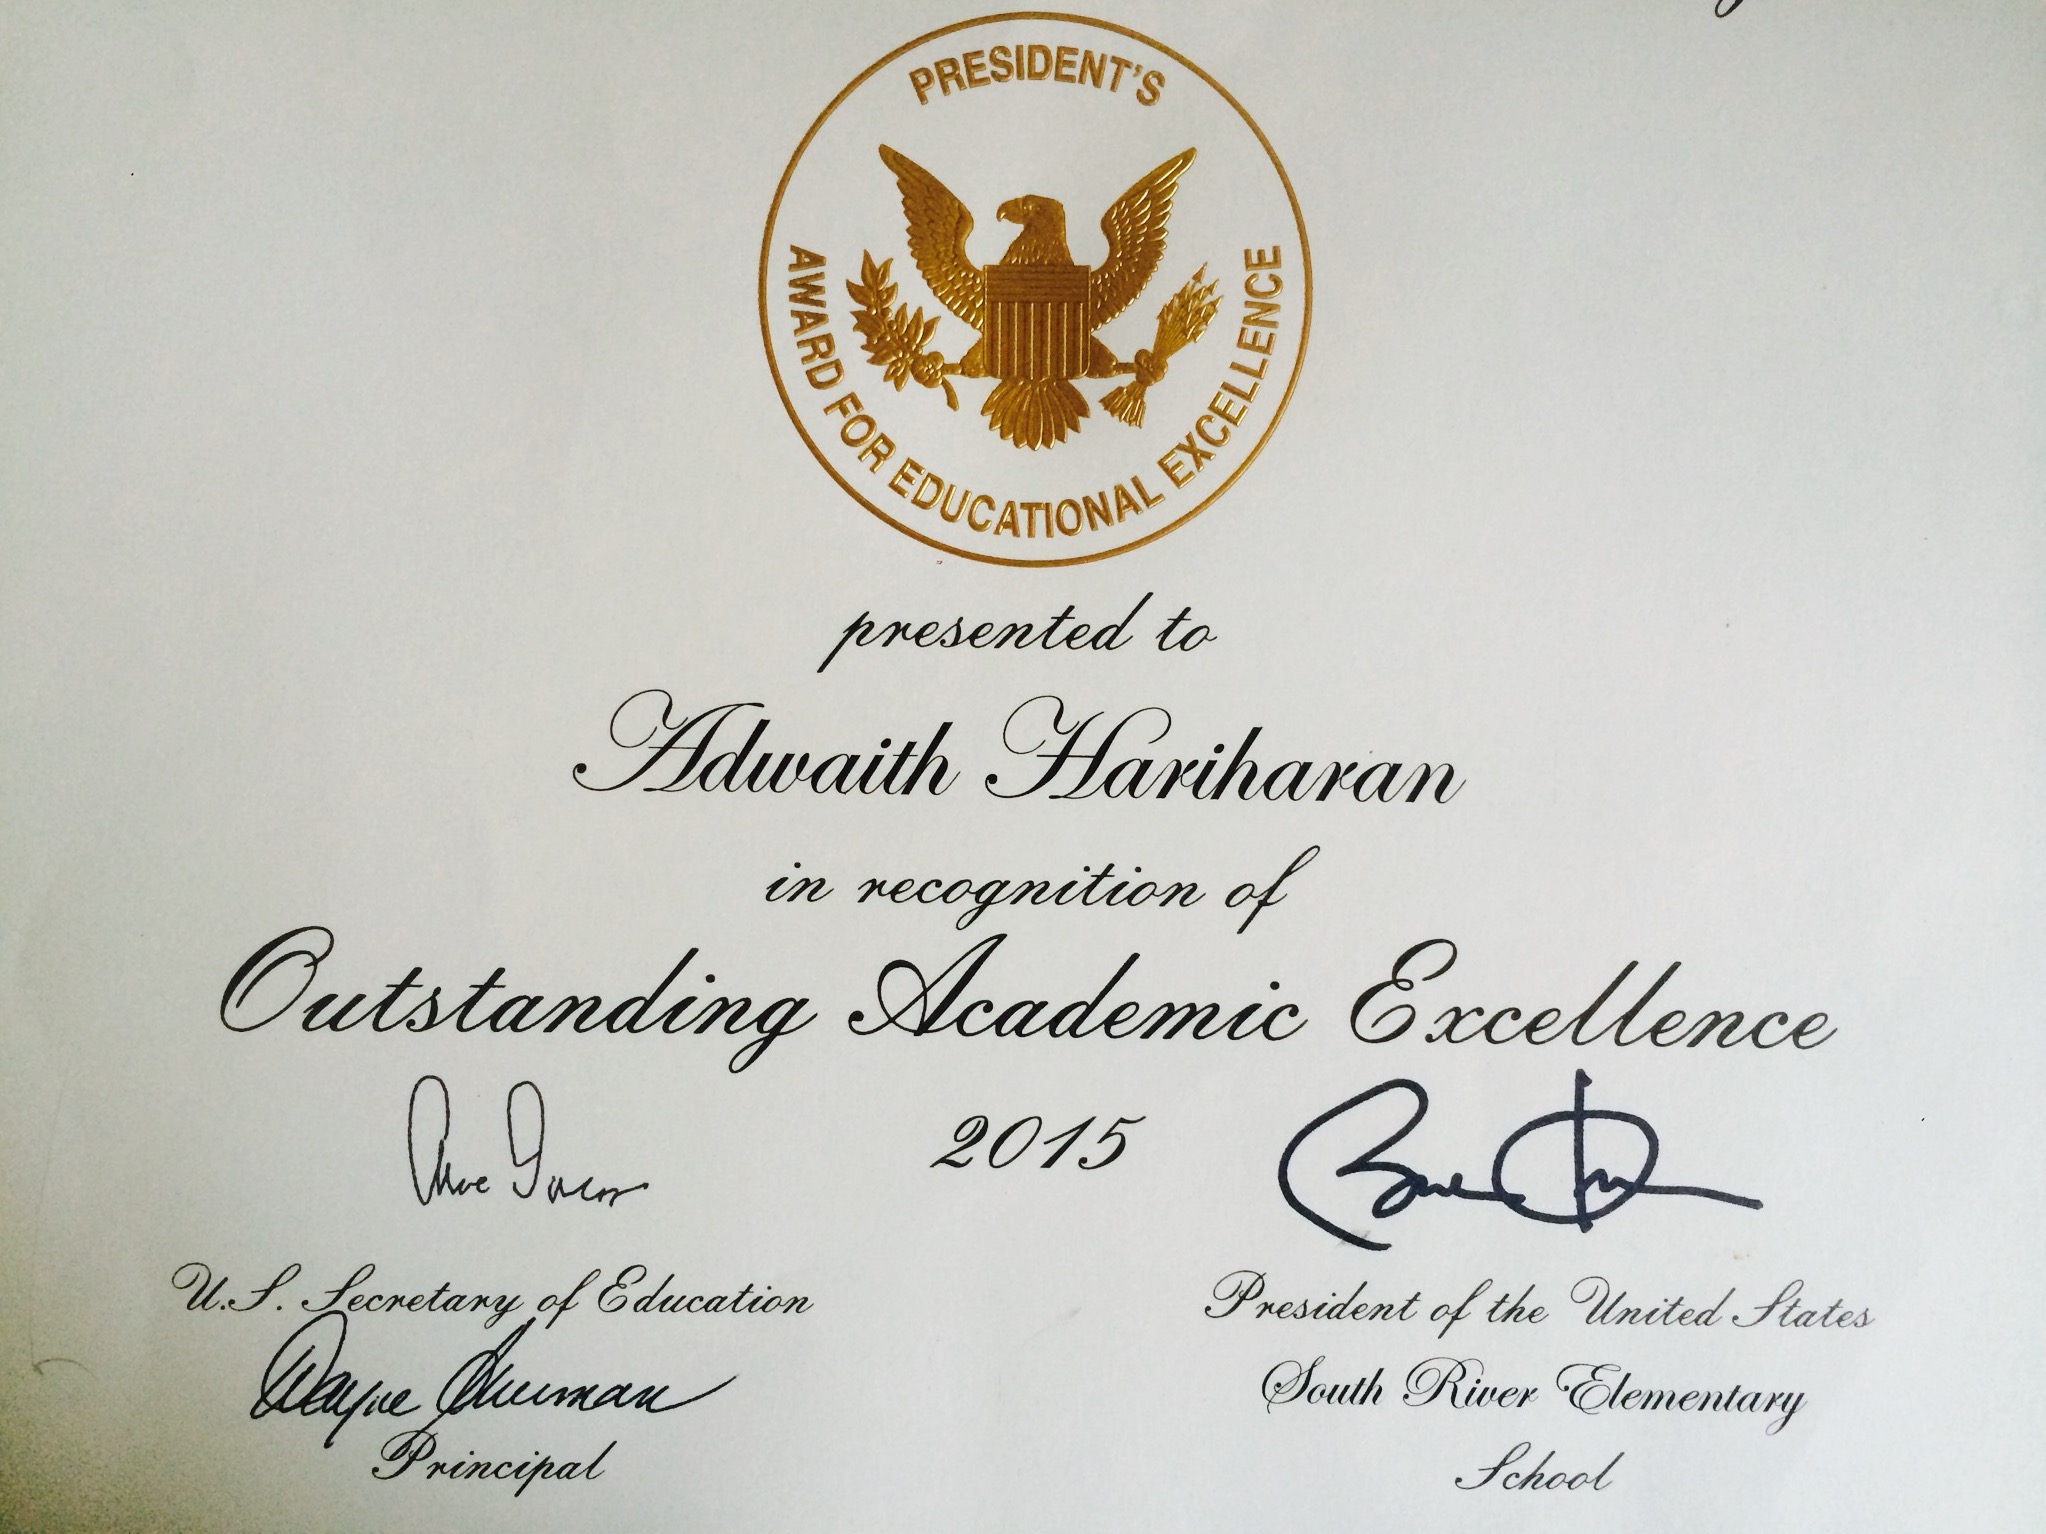 Math Genie graduate wins President's Educational Excellence Award from President Barack Obama